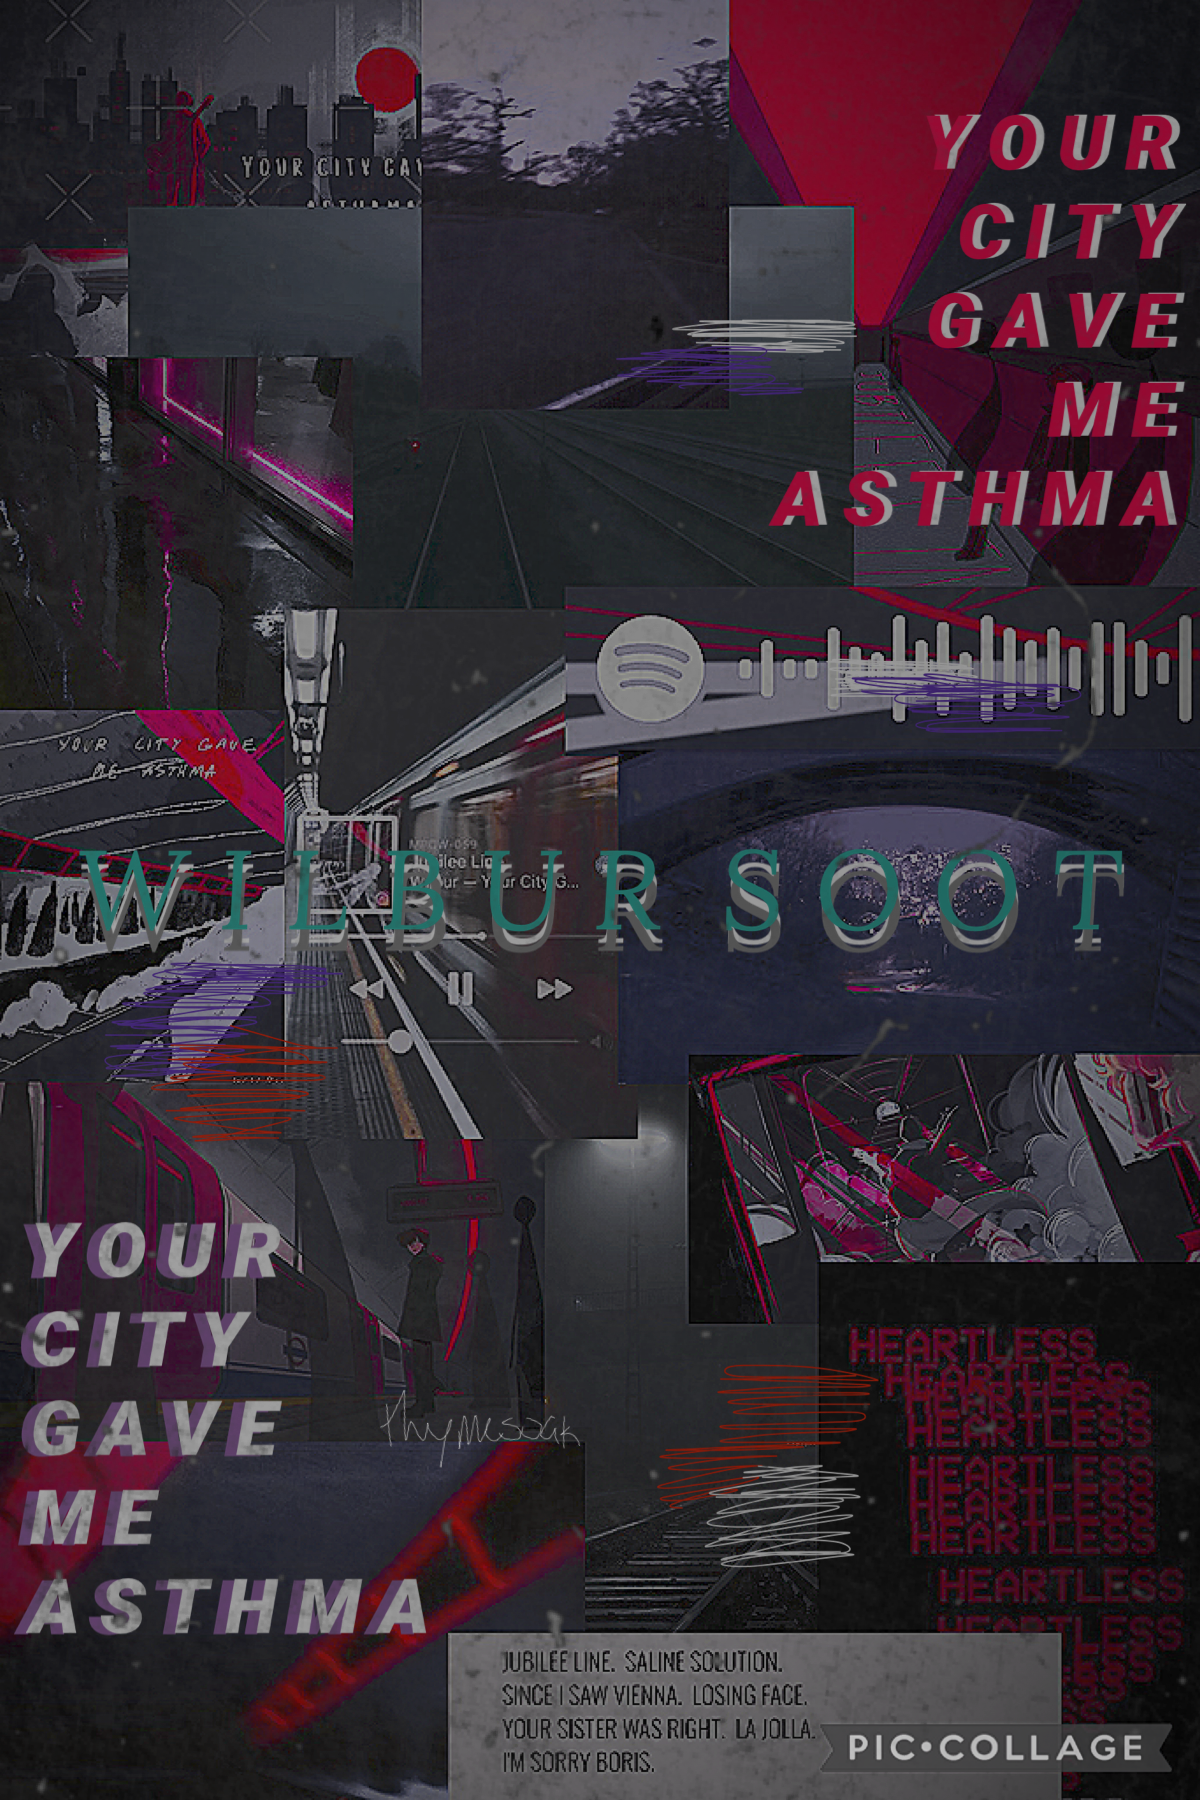 this was originally for my main acc but I feel like it didn’t turn out how I wanted it, but I still want to post it. so here it is

Inspired by the album: ‘your city gave me asthma’ by Wilbur Soot